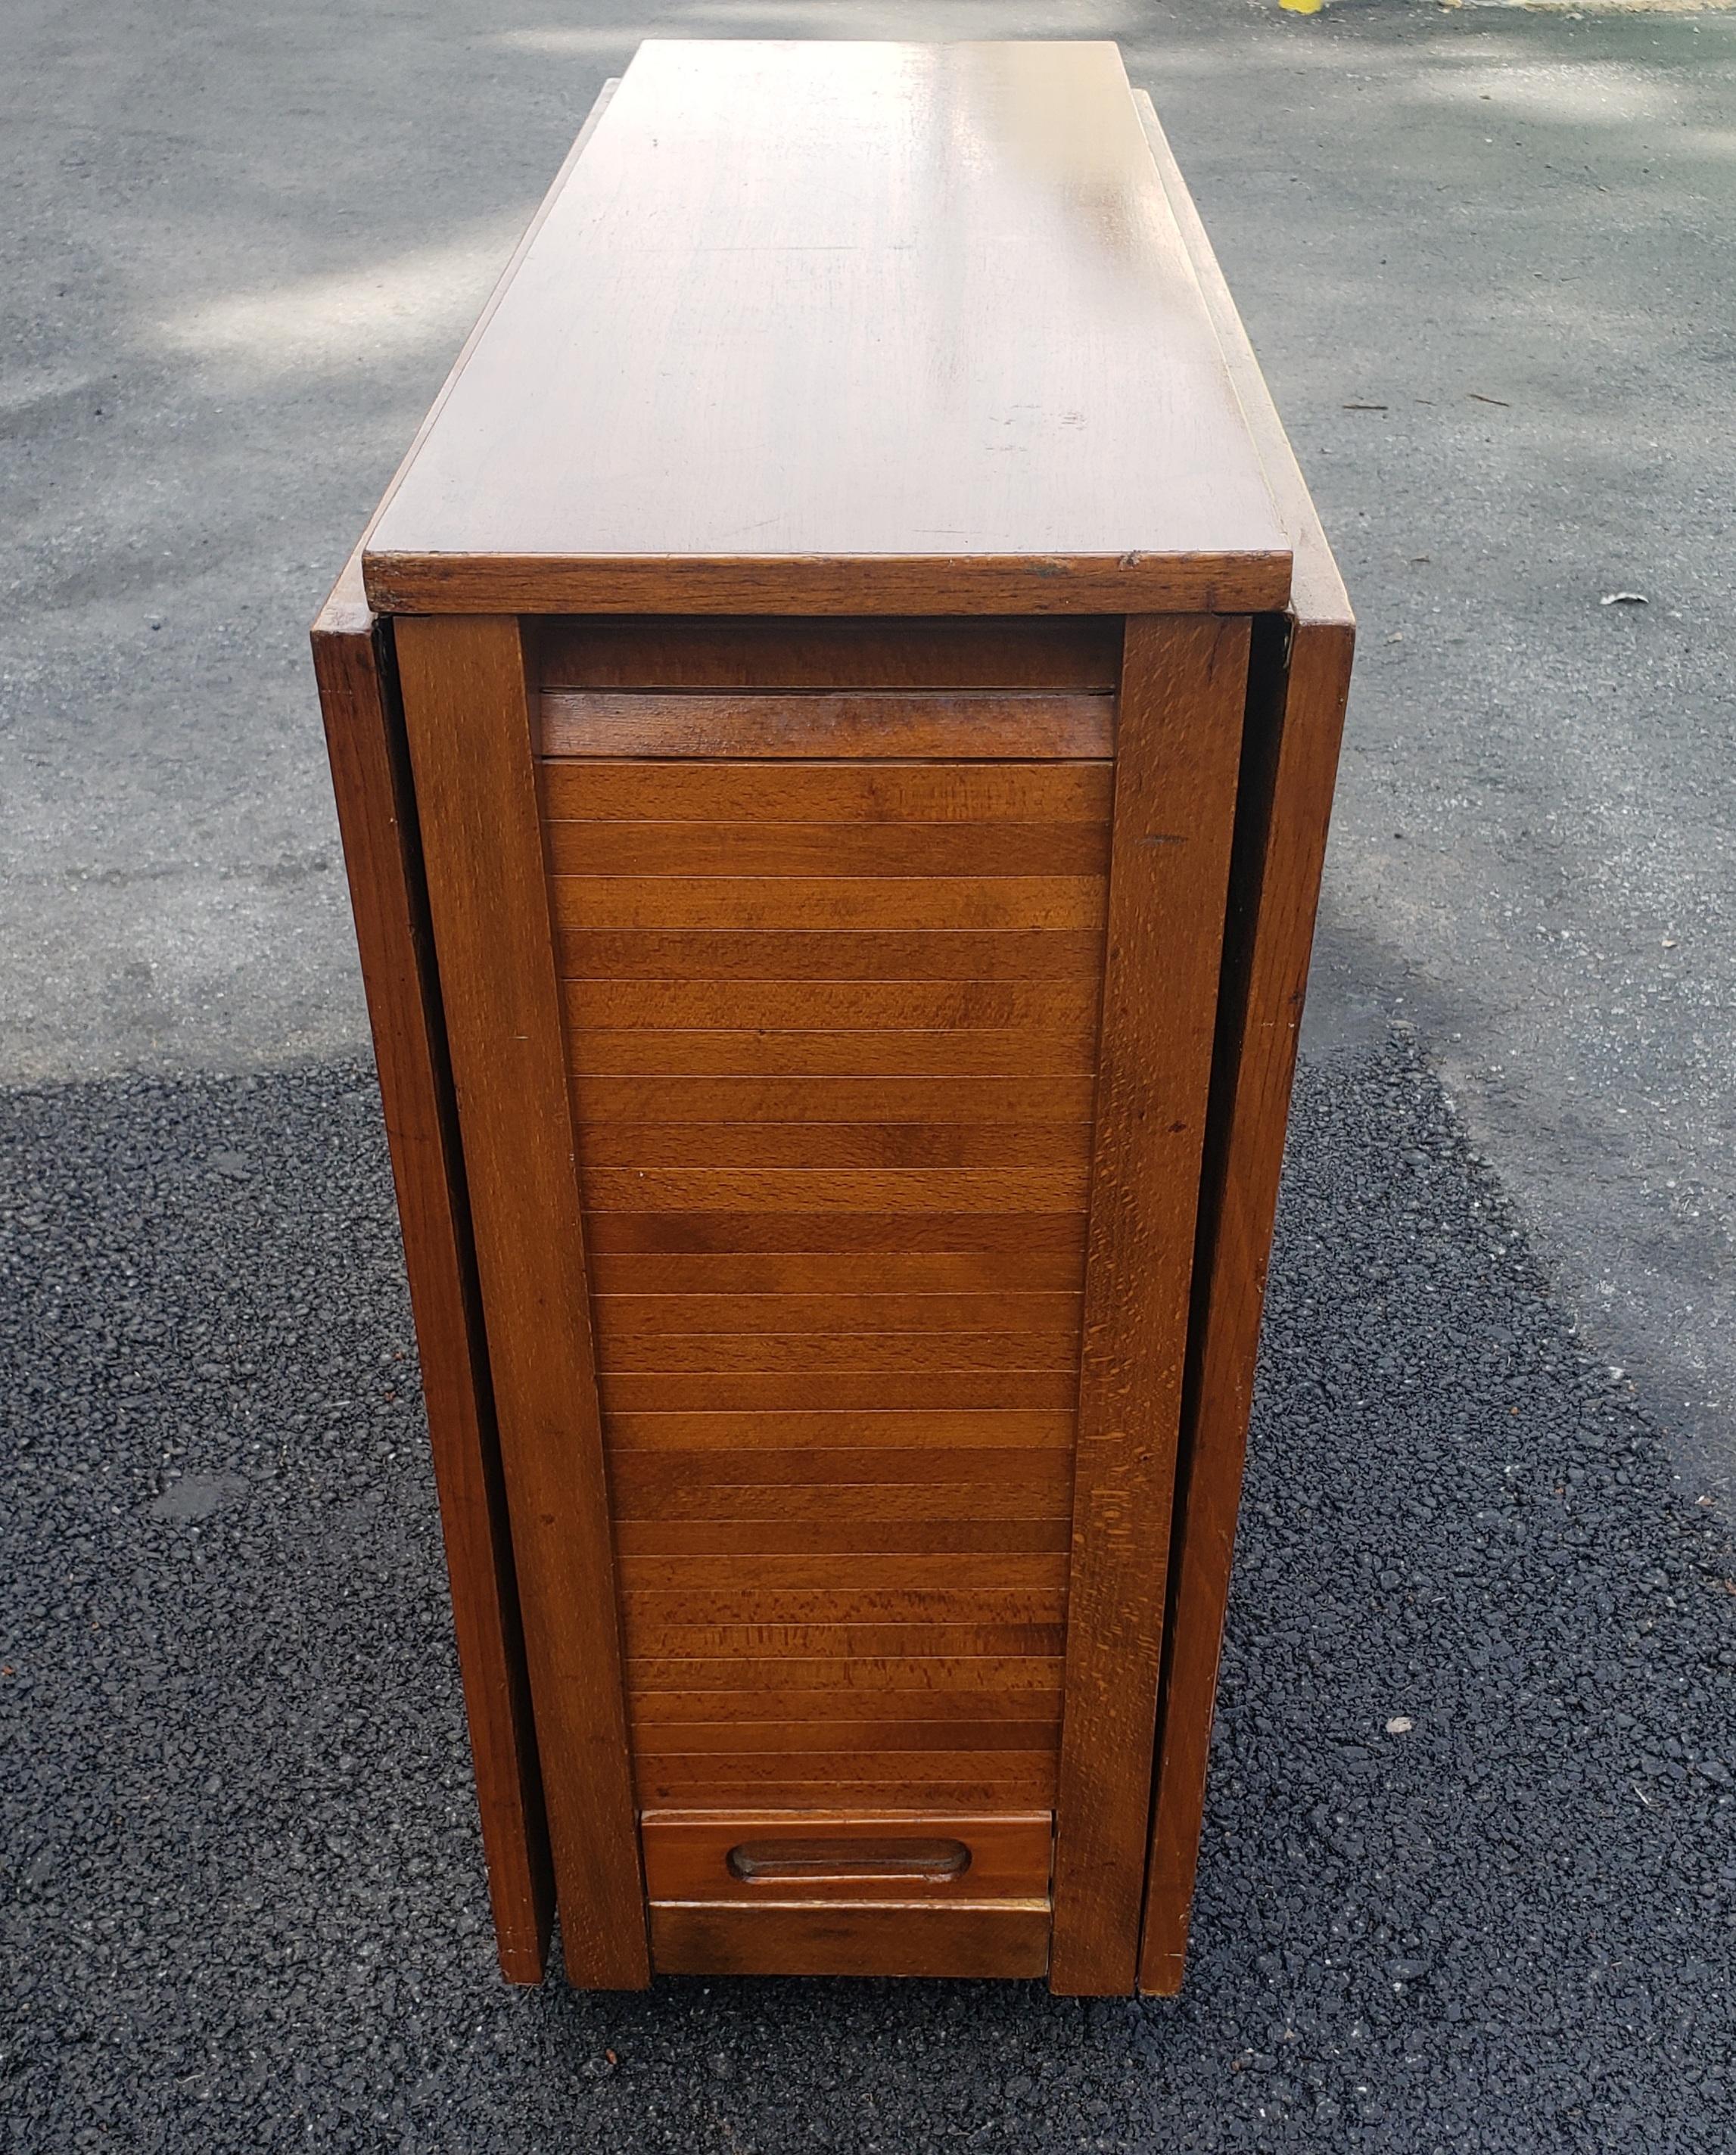 Mid-Century Danish Modern Teak Drop-Leaf Dining Table with Storage on Rollers For Sale 4